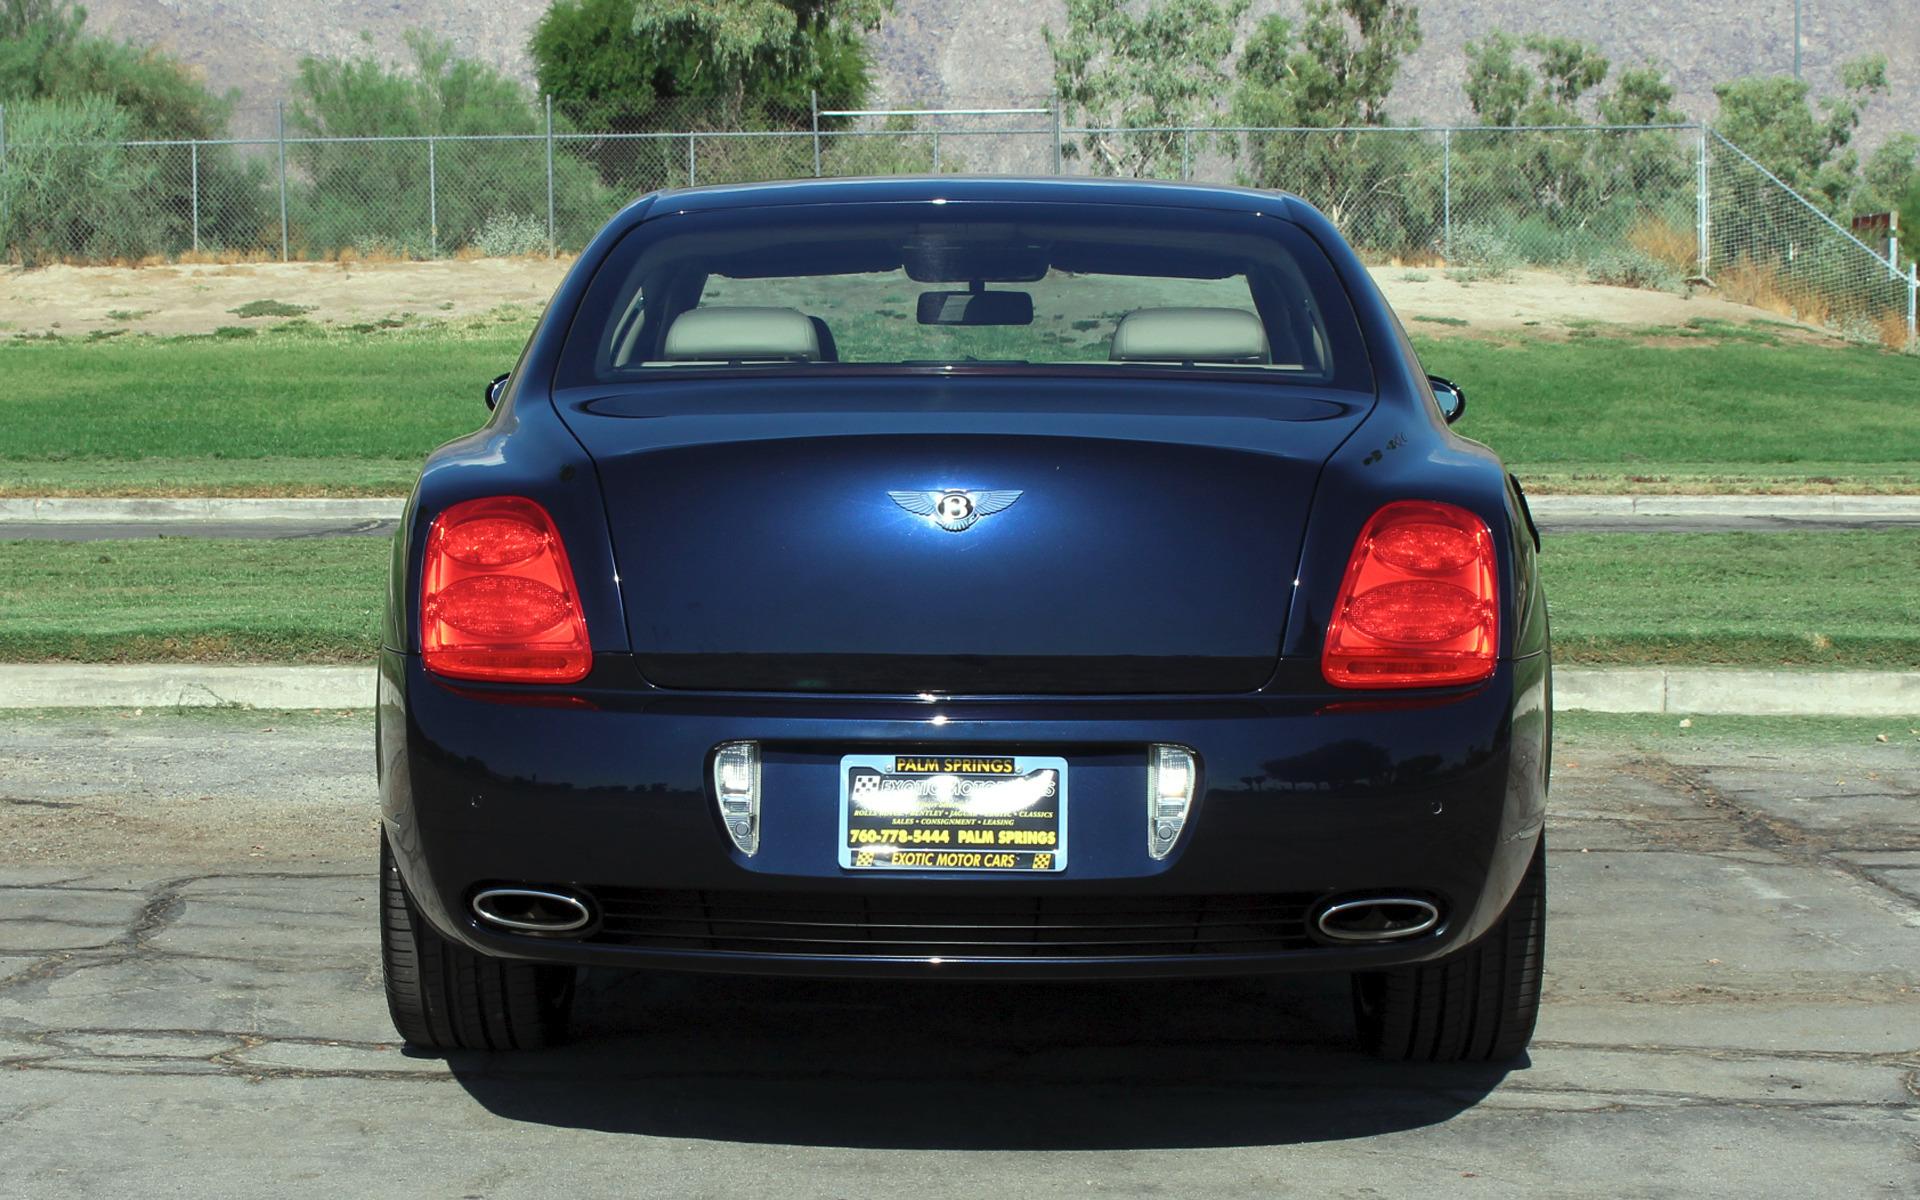 2006 Bentley Continental Flying Spur Stock # BE120 for sale near Palm  Springs, CA | CA Bentley Dealer